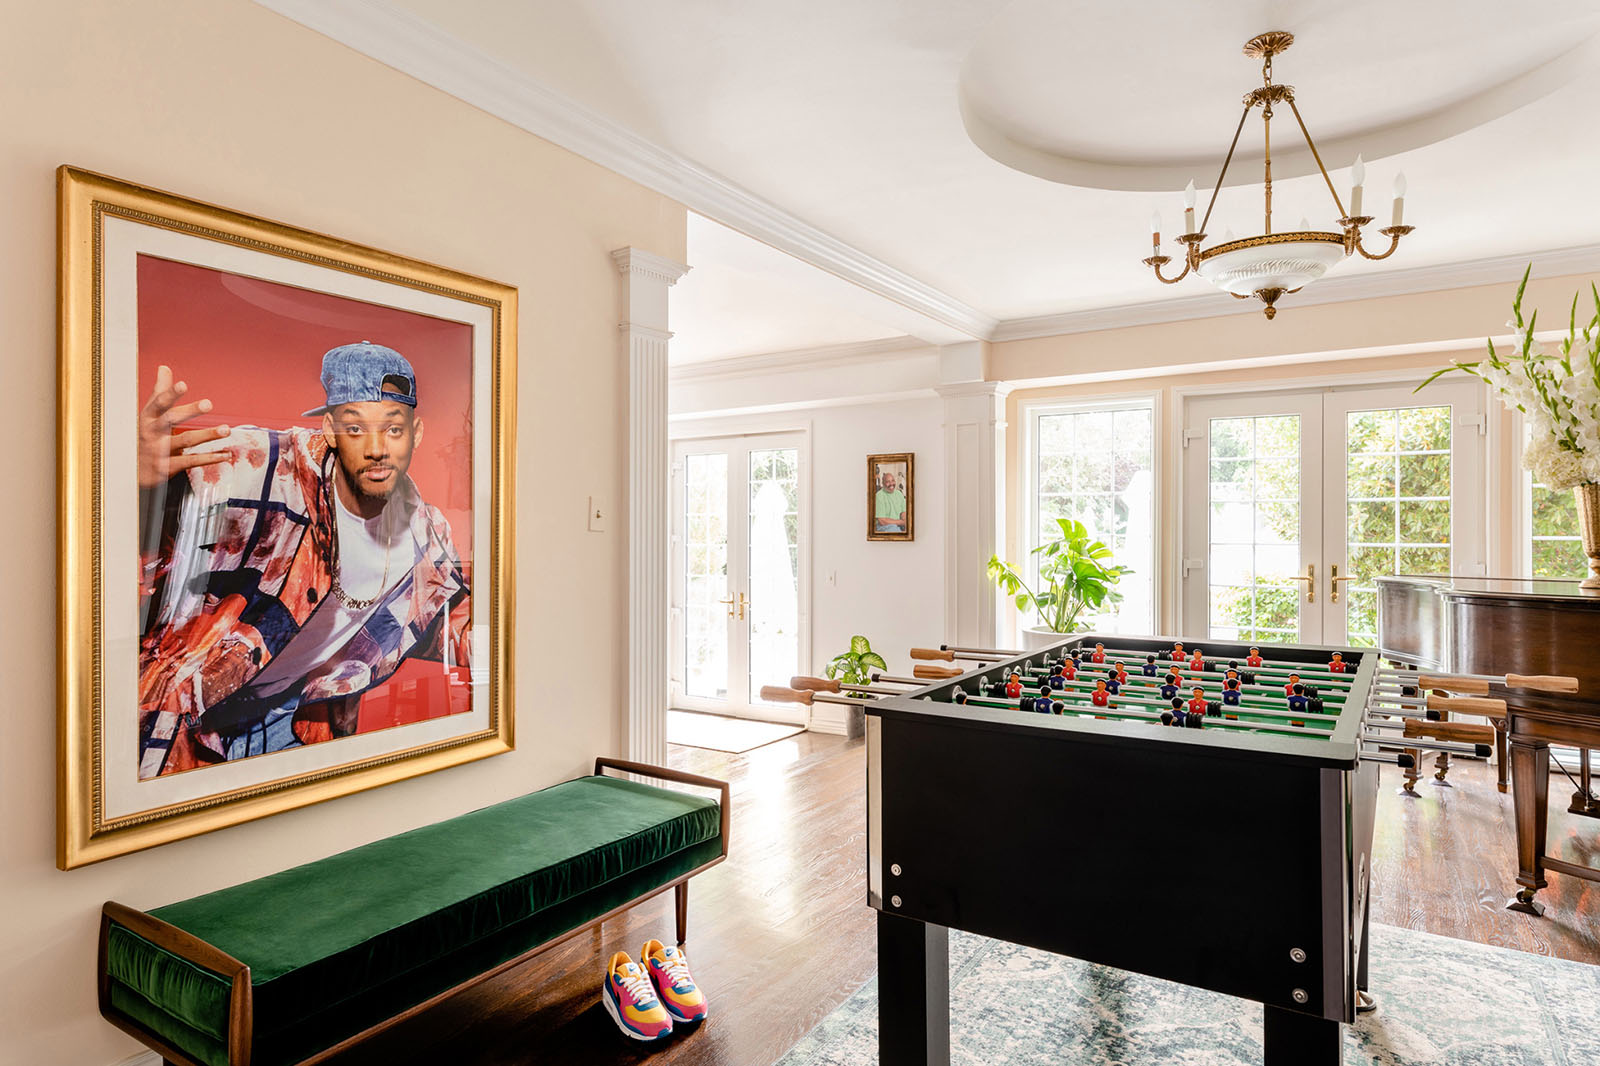 Book An Airbnb Stay At Will Smith’s “Fresh Prince Of Bel-Air” Home